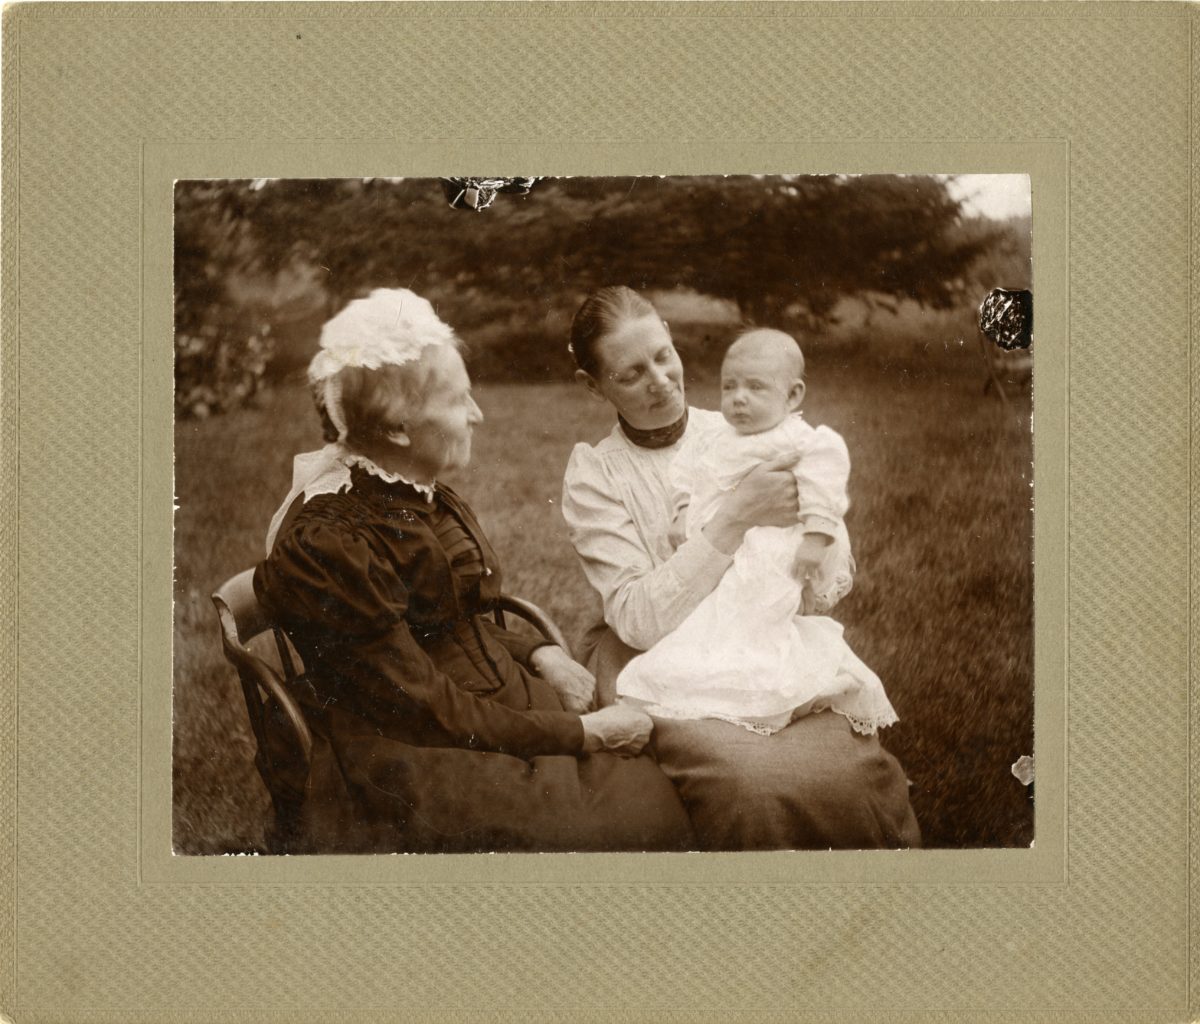 Elderly woman, young woman, and baby sit together outside.